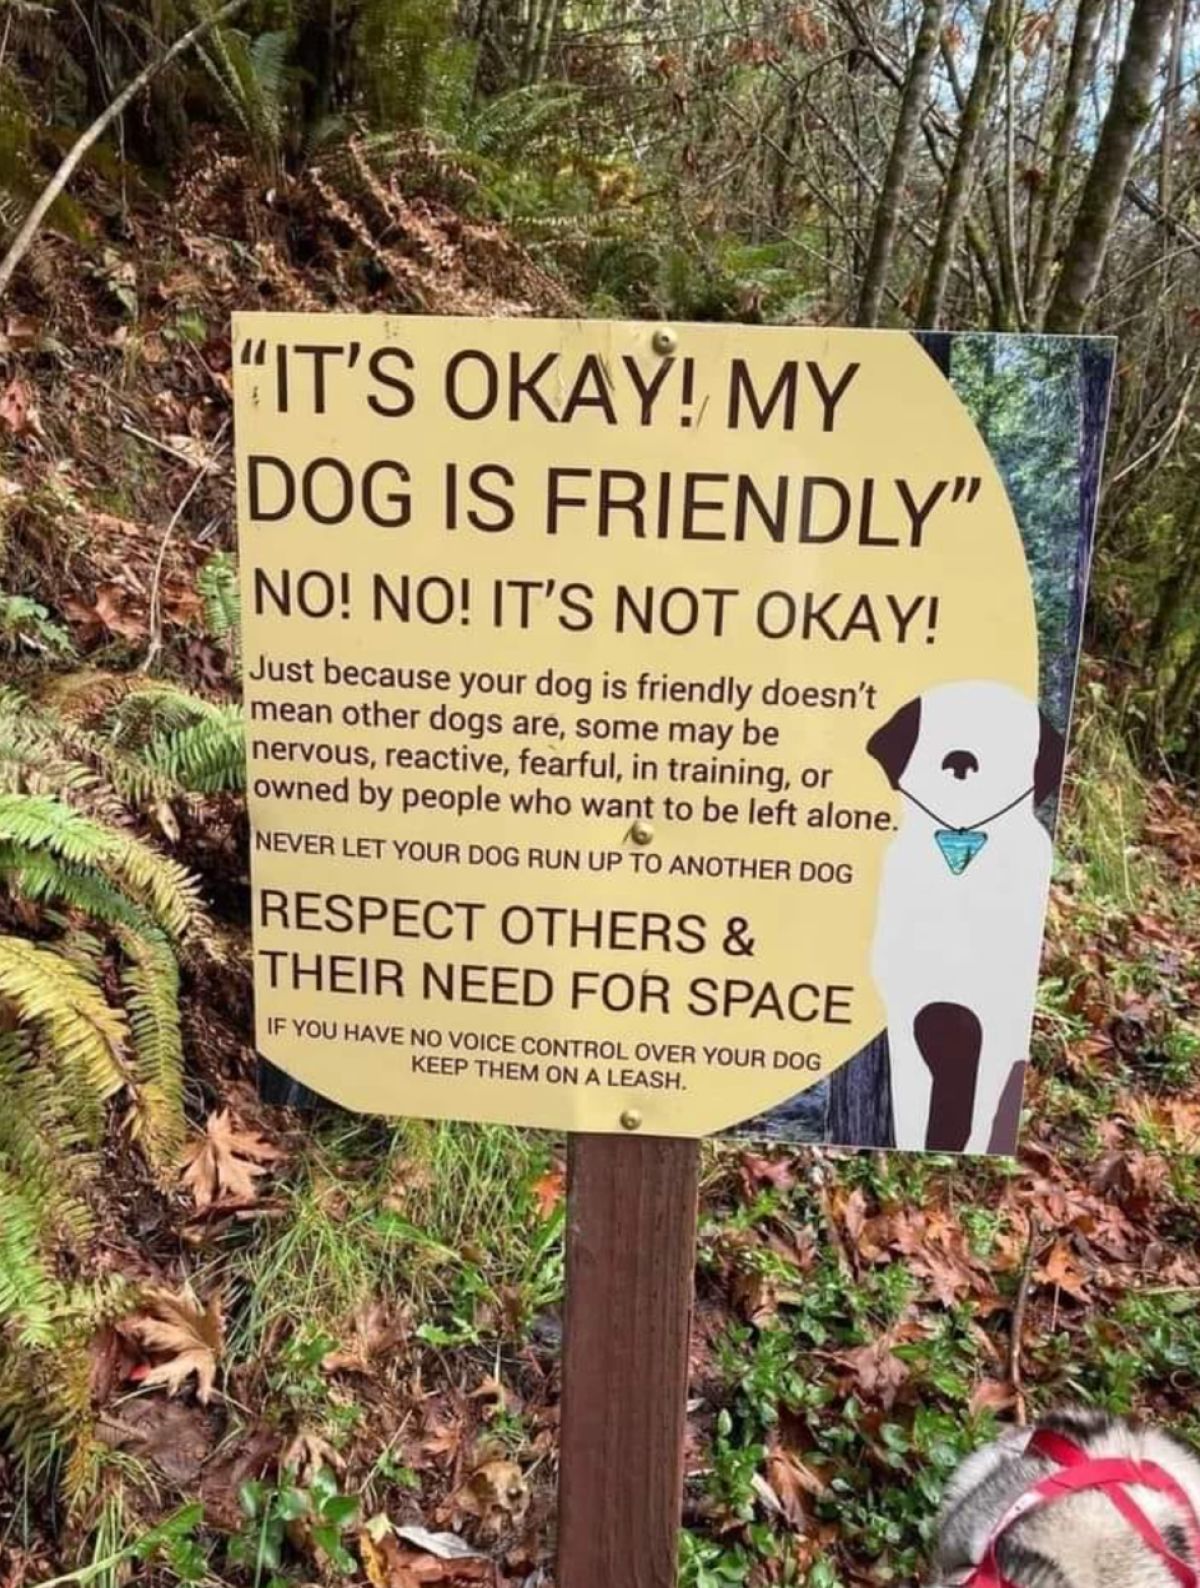 A sign asking dog owners to respect others, contributed by a Daily Pilot reader, stands in a forest setting.